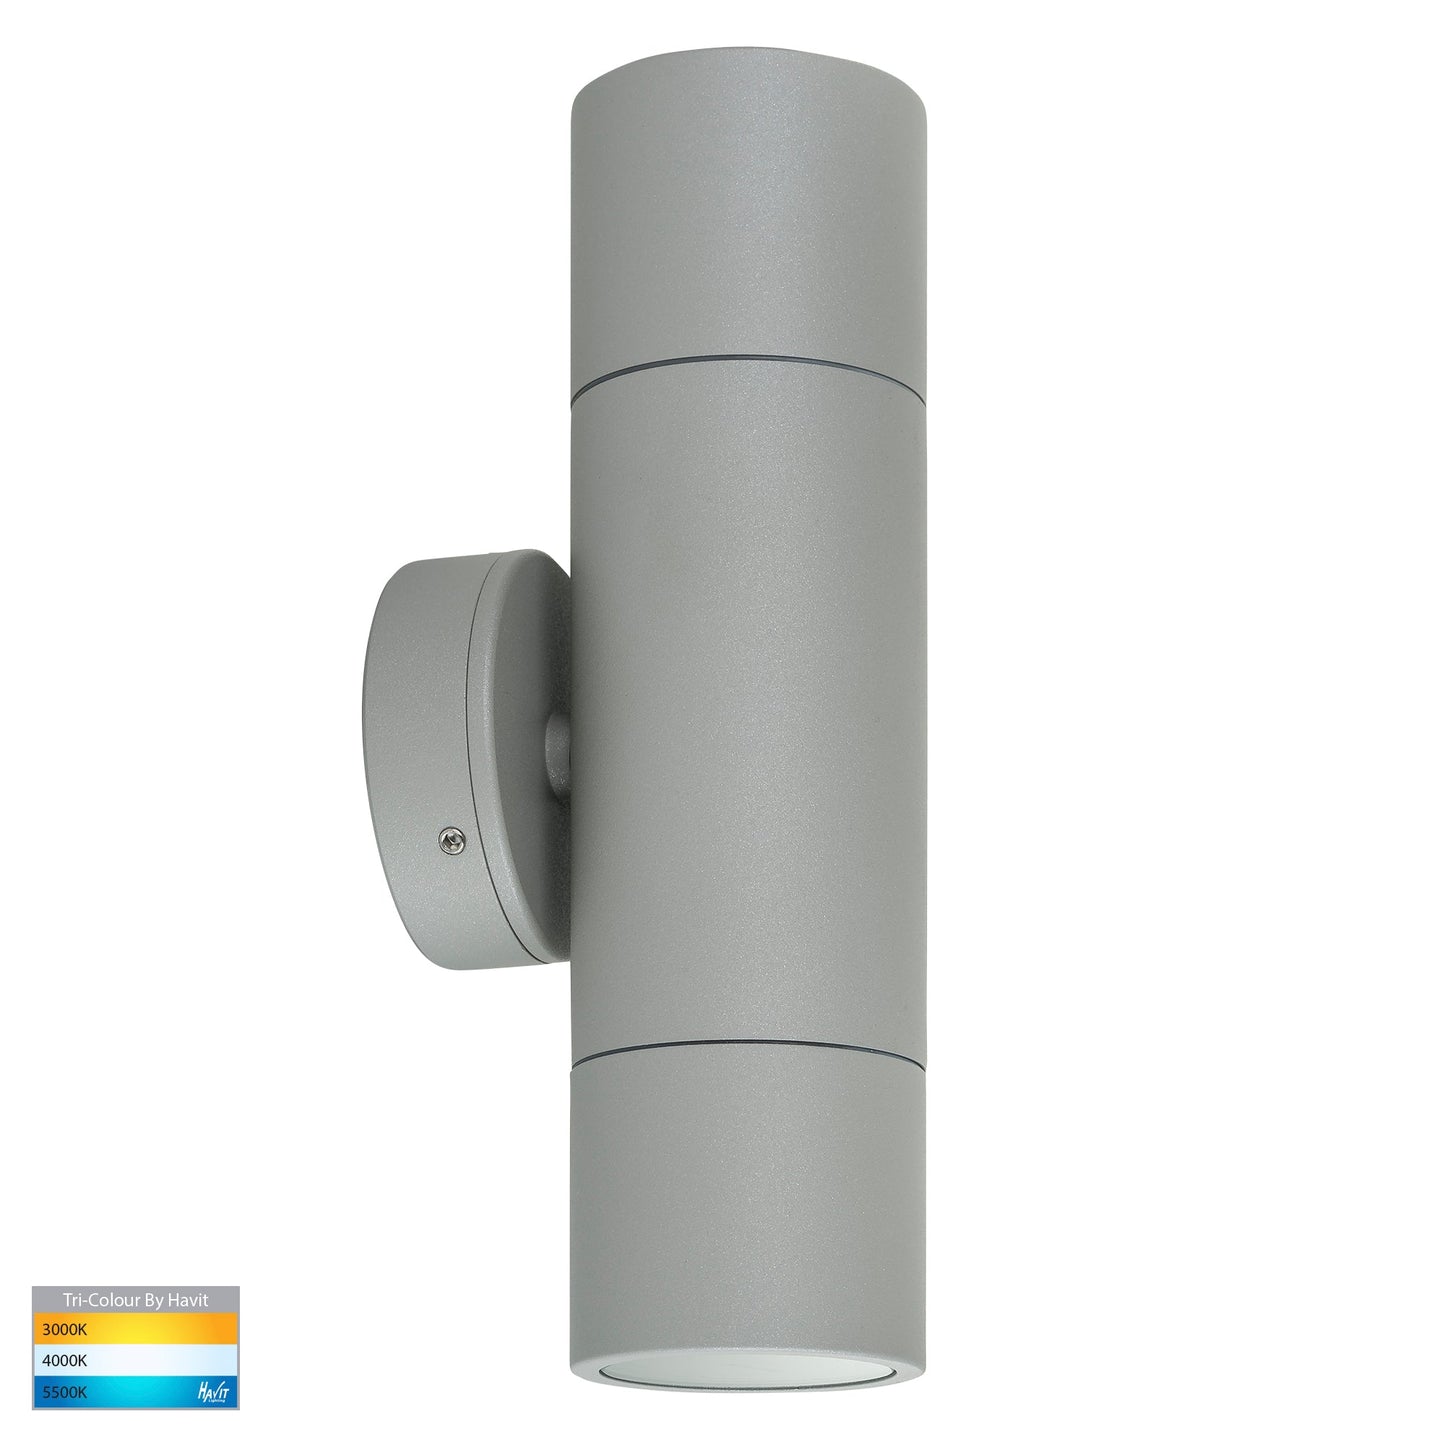 Hv1045t-Hv1047t - Tivah Silver Tri Colour Up and Down Wall Pillar Lights